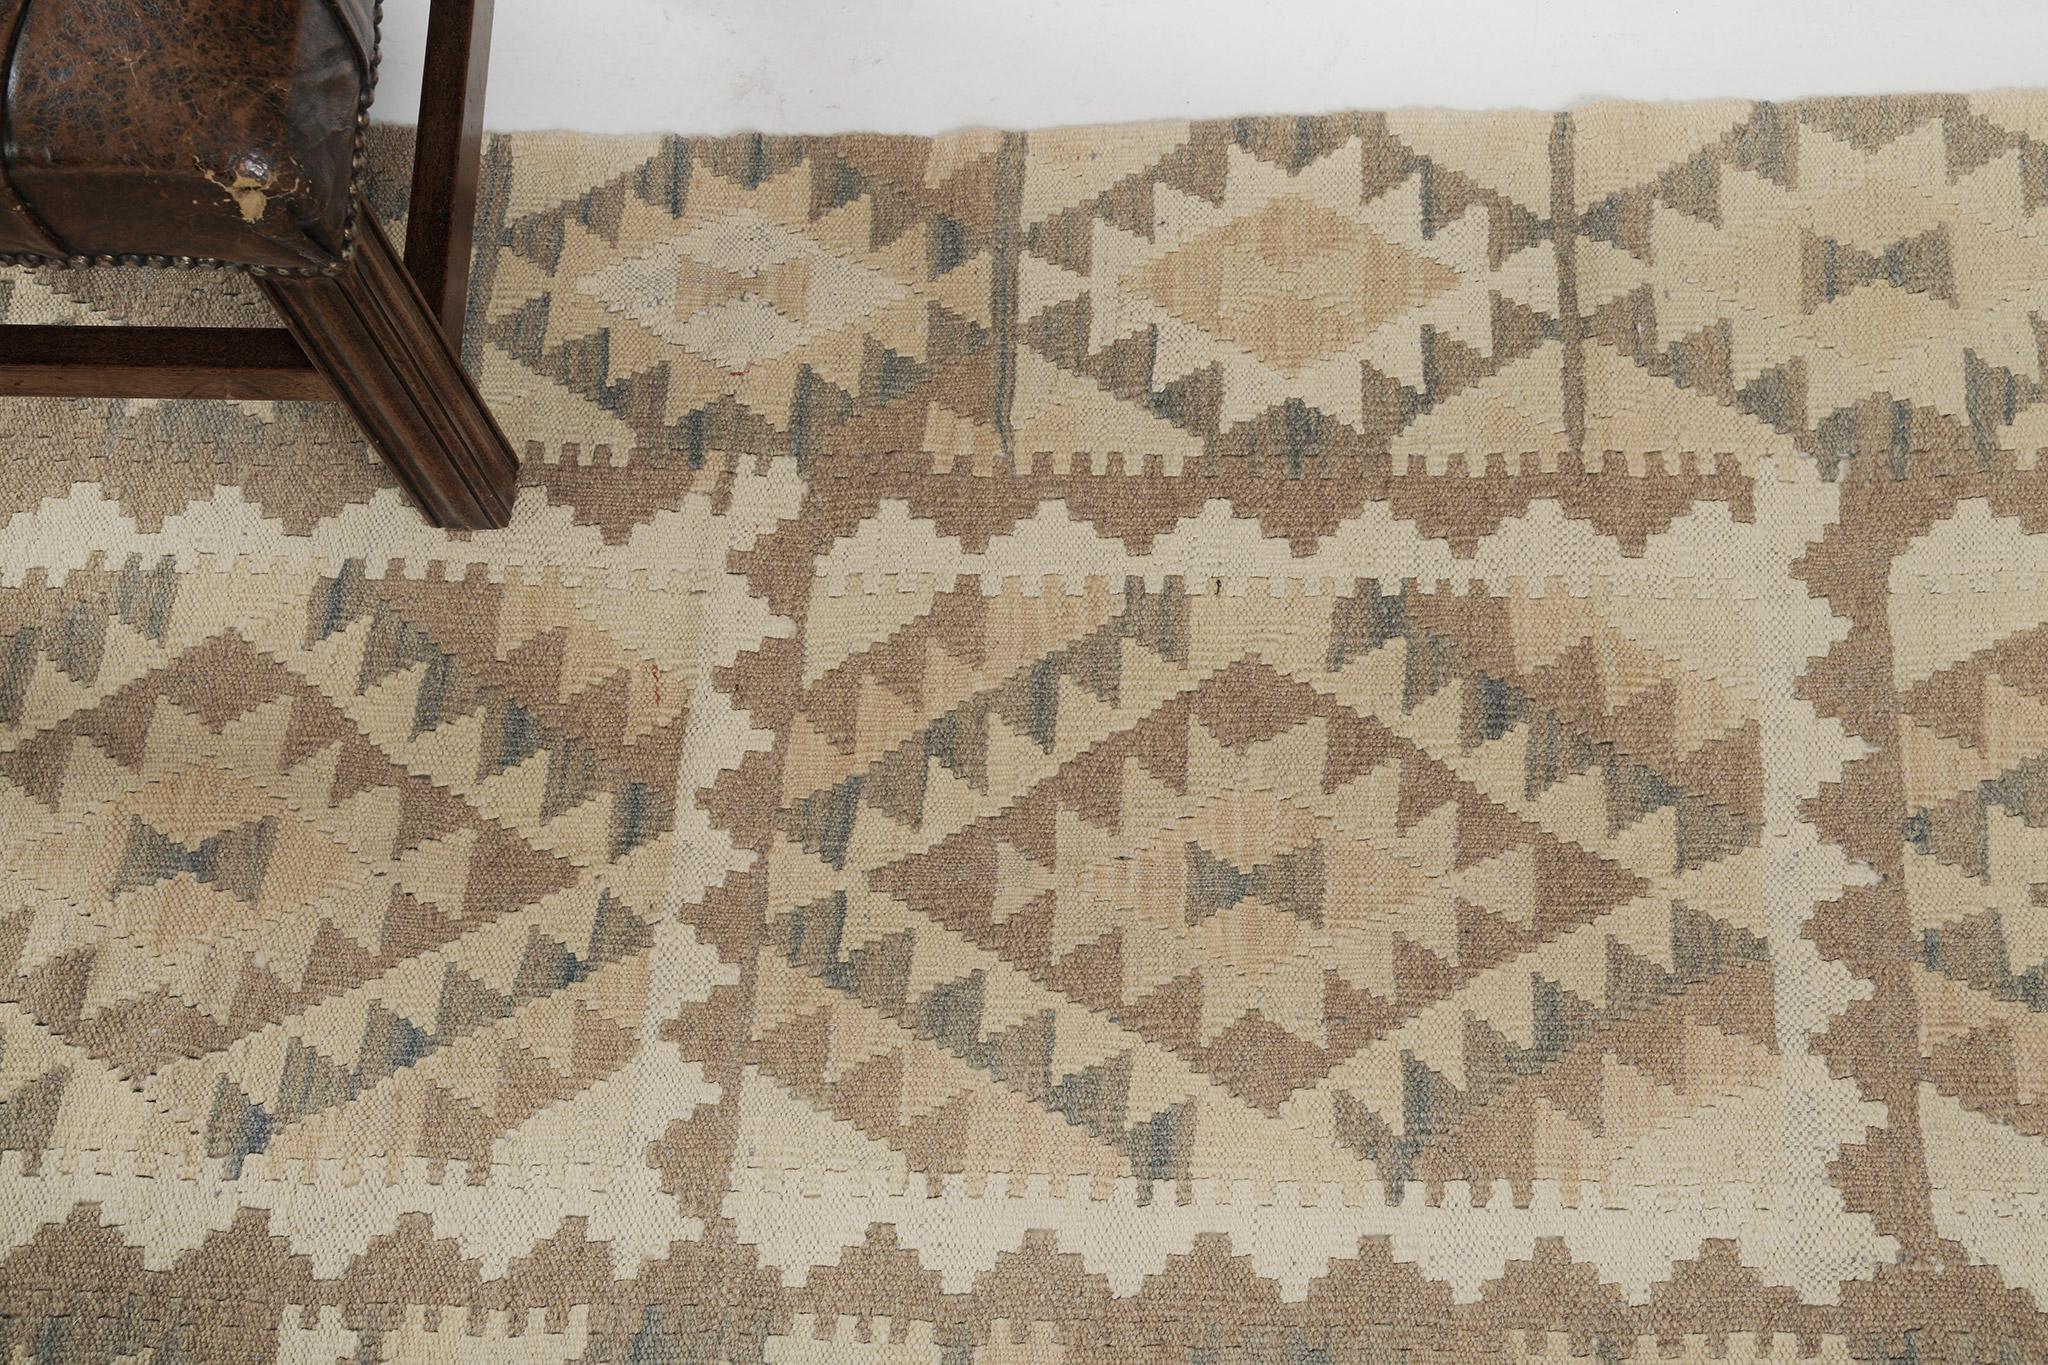 These tribal patterns create a promising and remarkable design for traditional interiors. This incredible vintage-styled flatweave Kilim features geometrical tribal motifs and symbols through panel design of multi-colored natural palettes. A